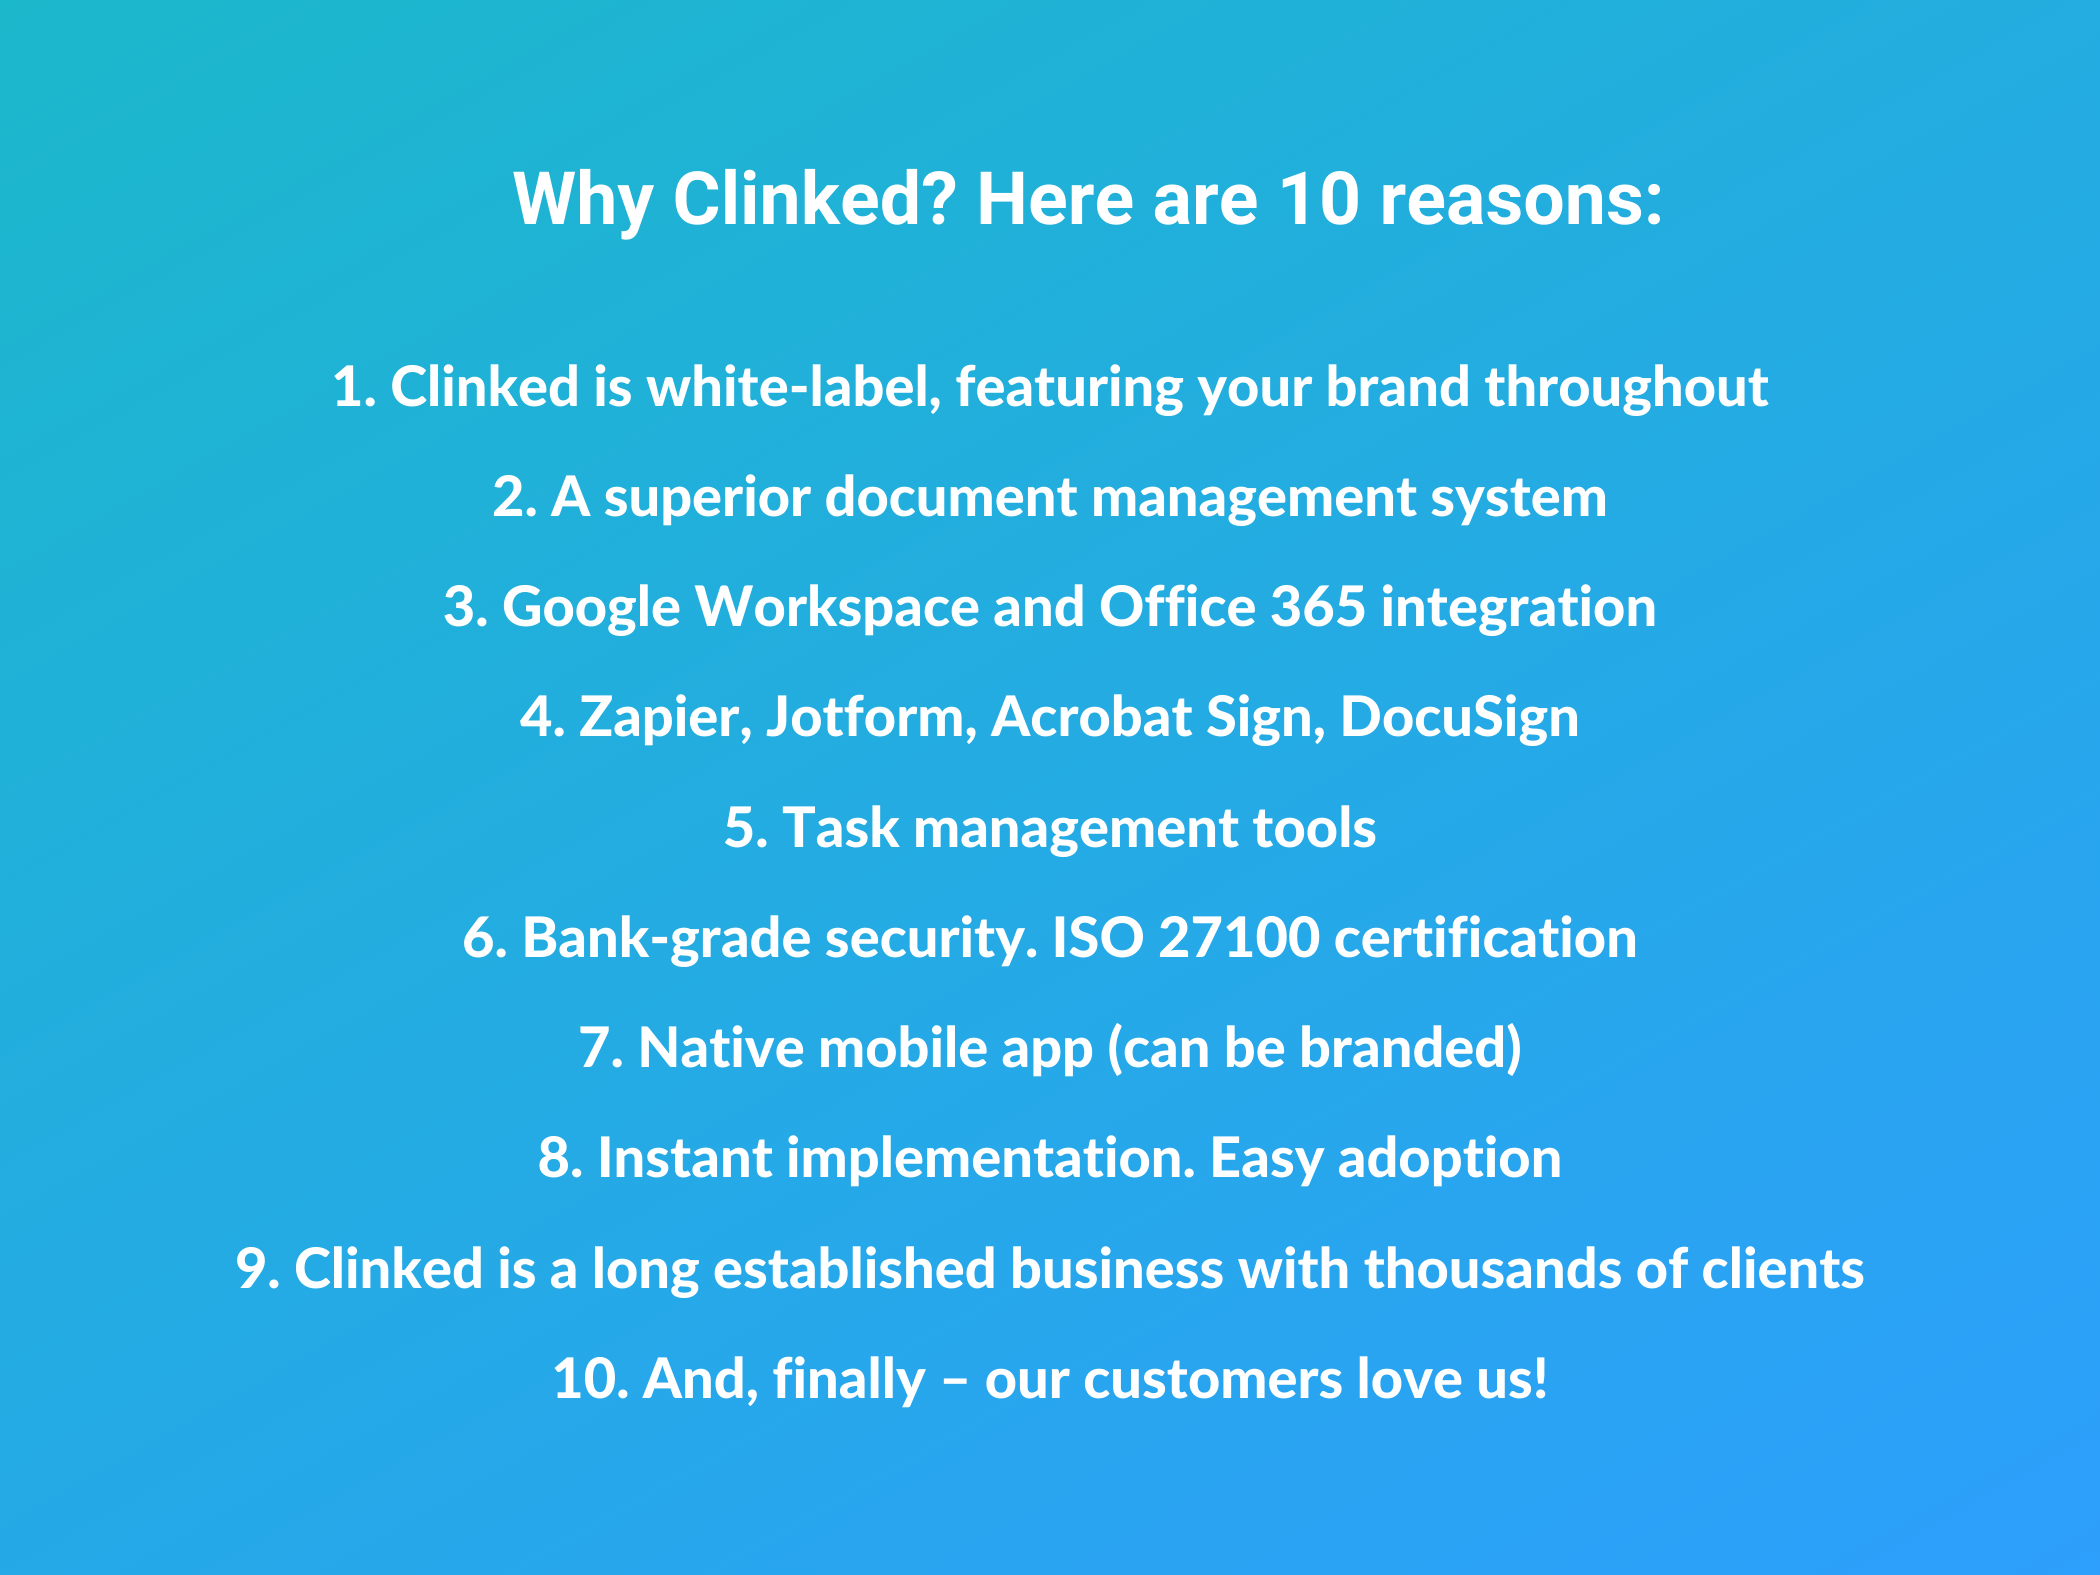 Clinked Software - What makes Clinked stand out from its competition?